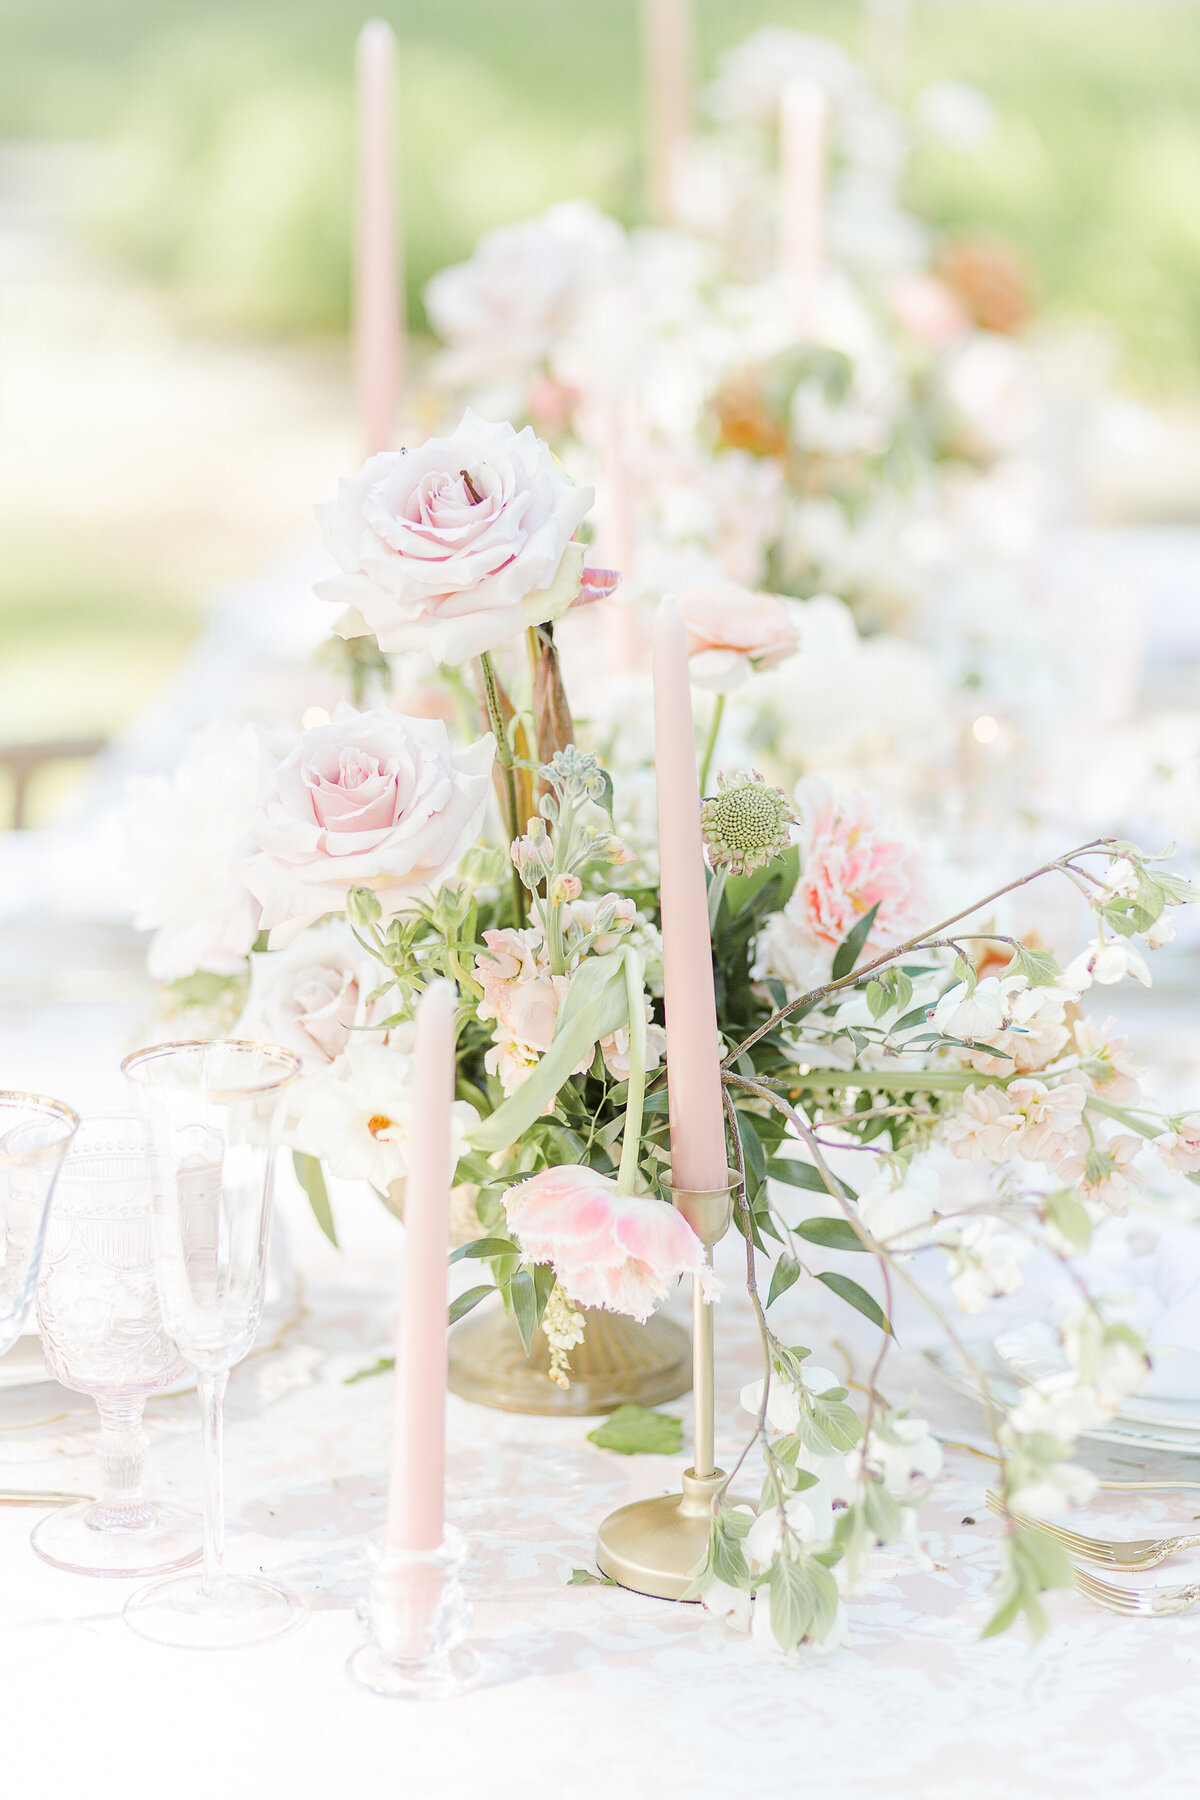 A tablescape is captured featuring pink blooms with greenery, and brushed gold candlesticks and flatware. Captured by Lia Rose Weddings